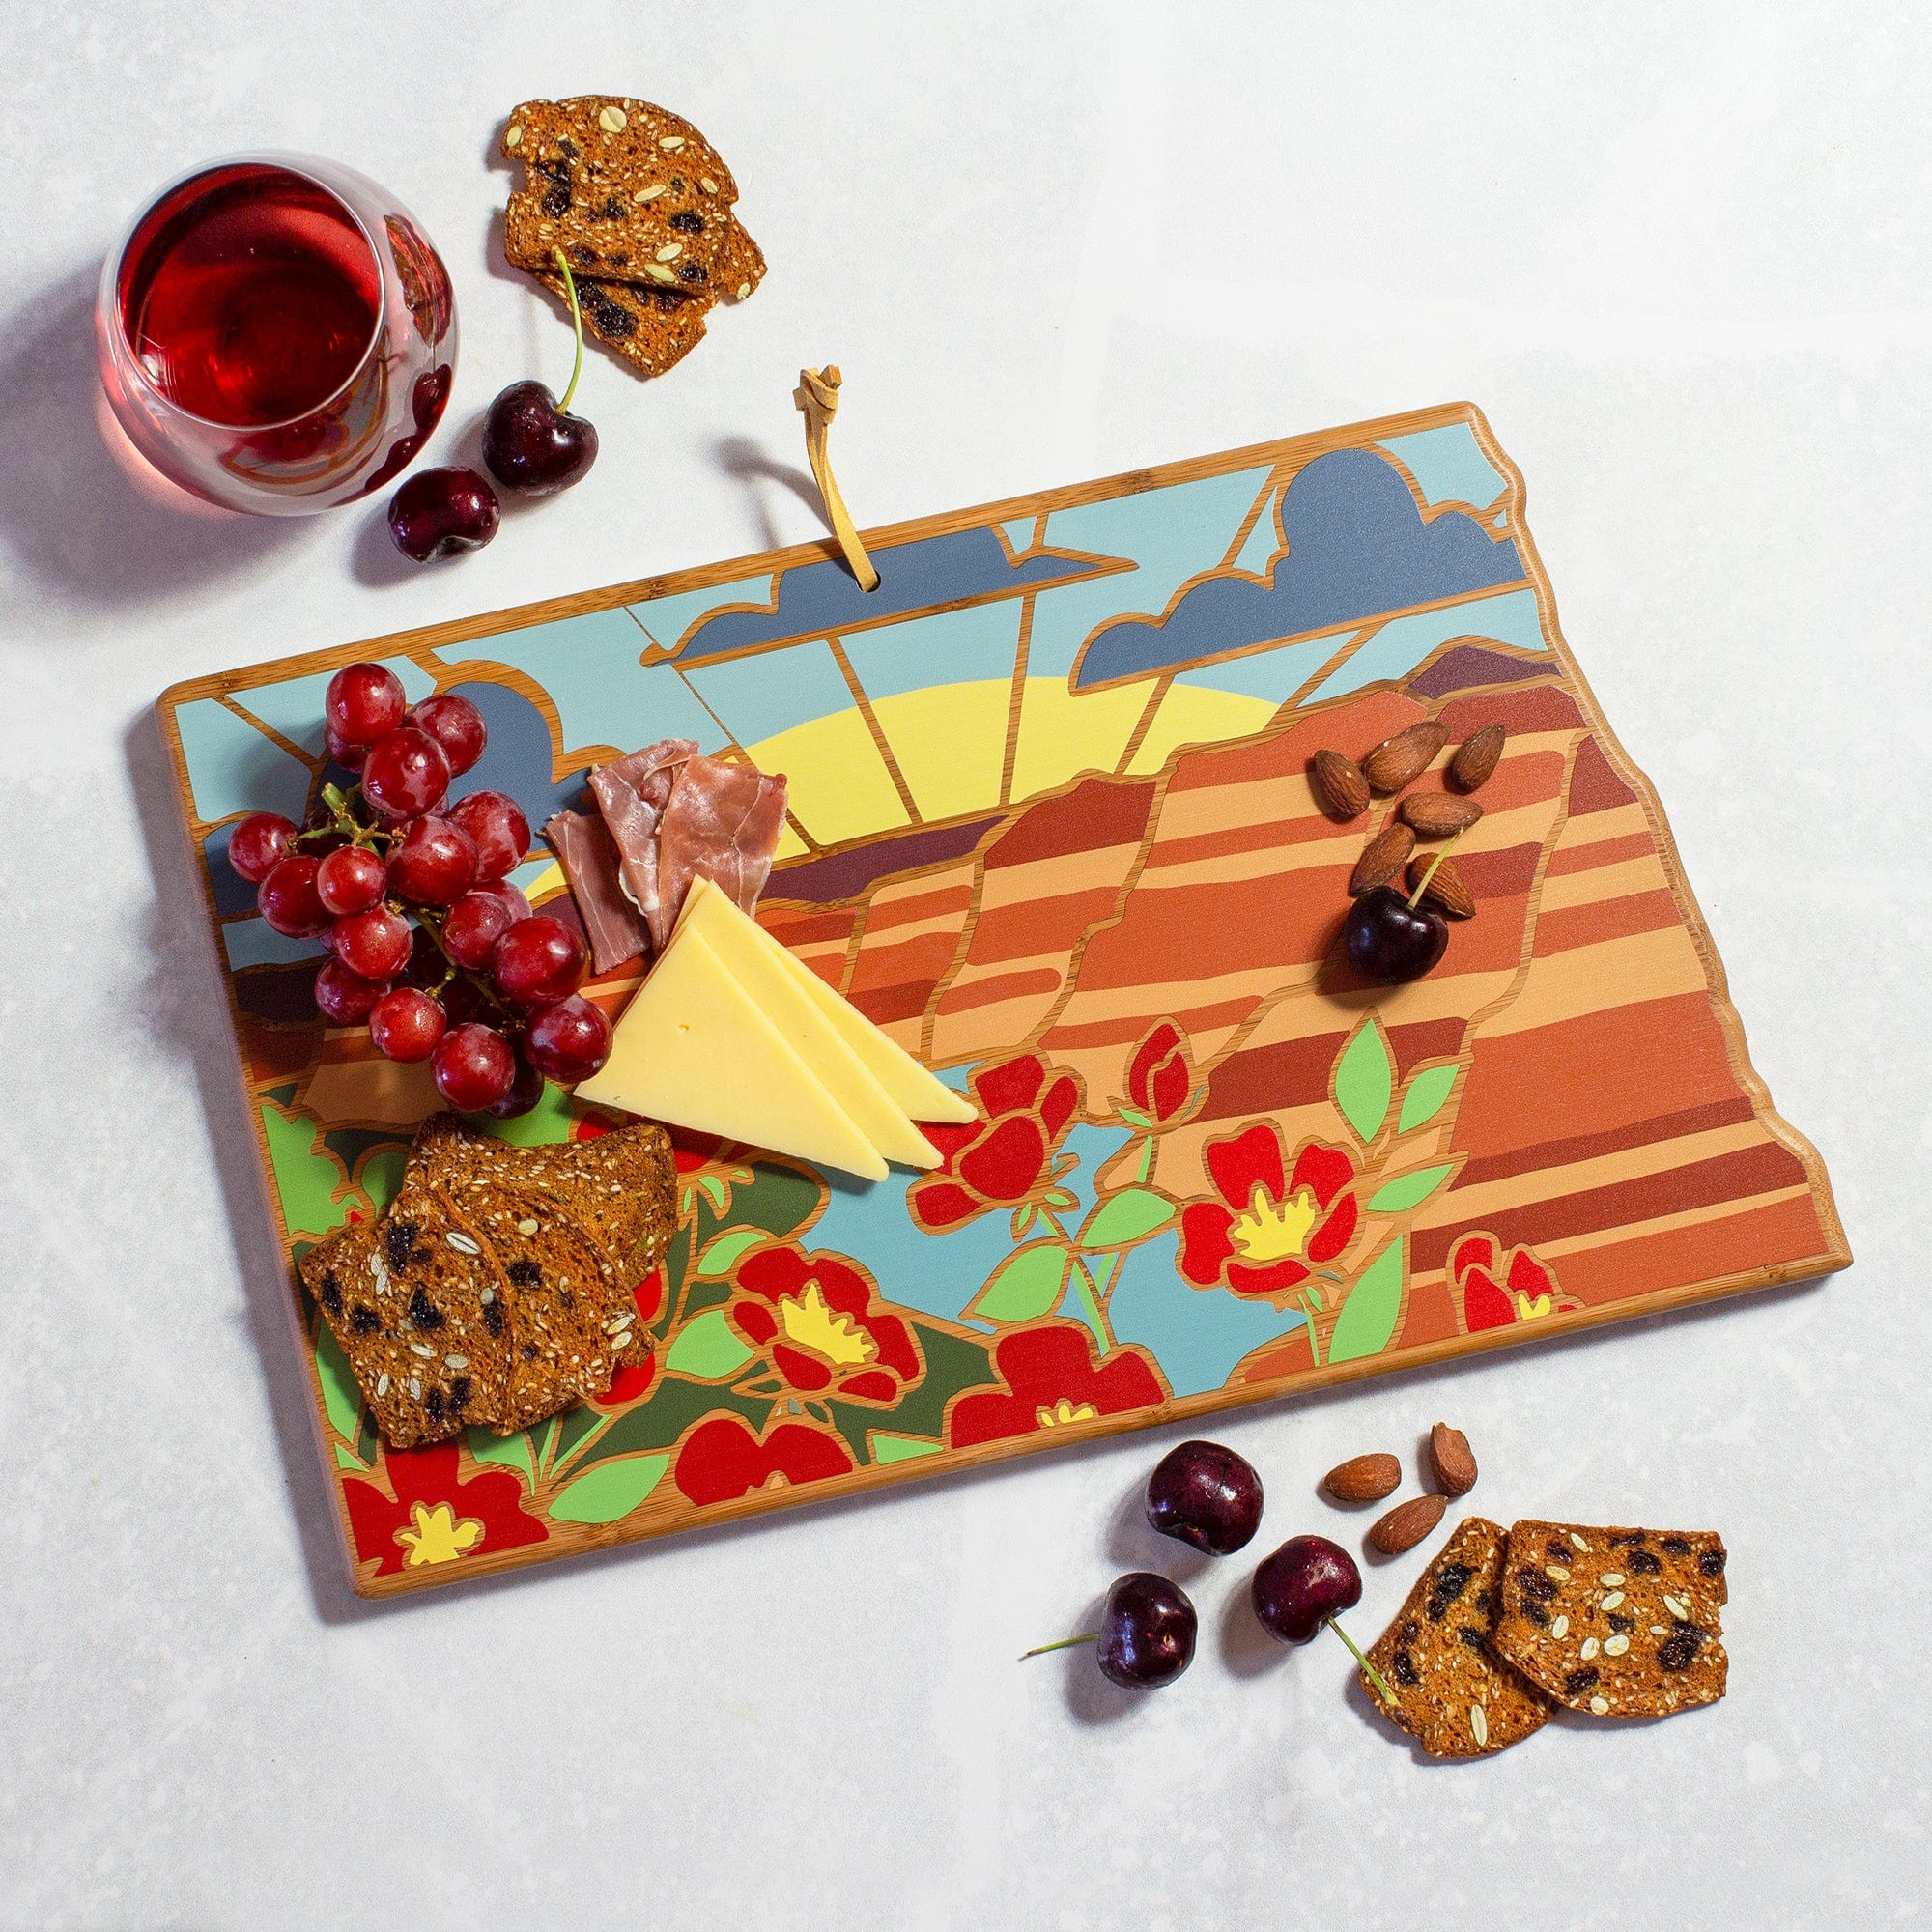 Totally Bamboo North Dakota State Shaped Serving and Cutting Board with Artwork by Summer Stokes